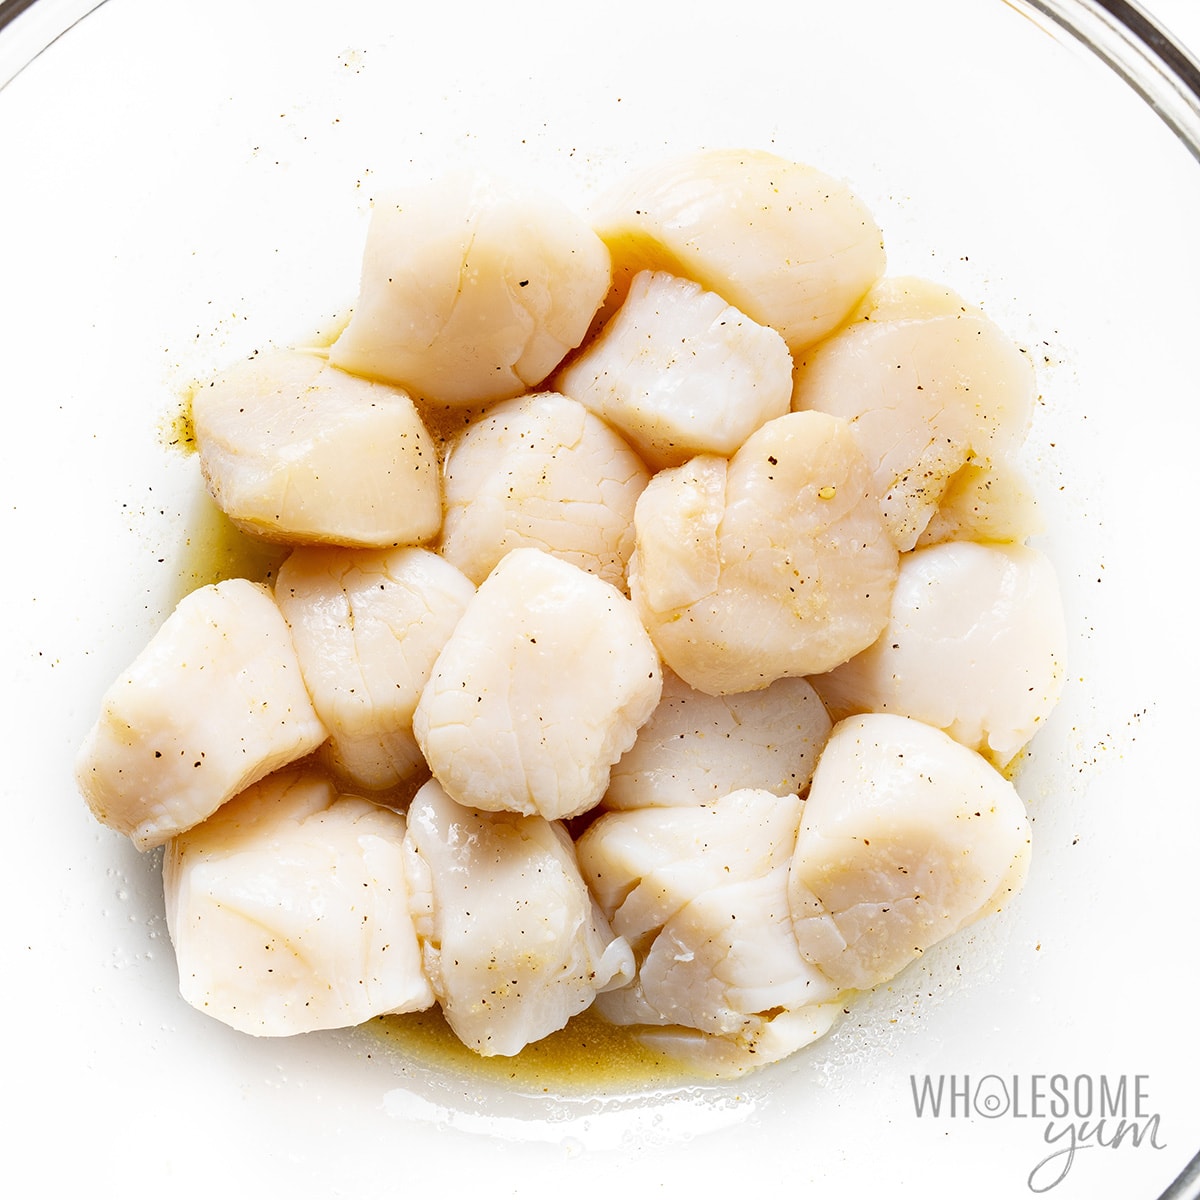 Raw scallops in a bowl, seasoned with salt and pepper.